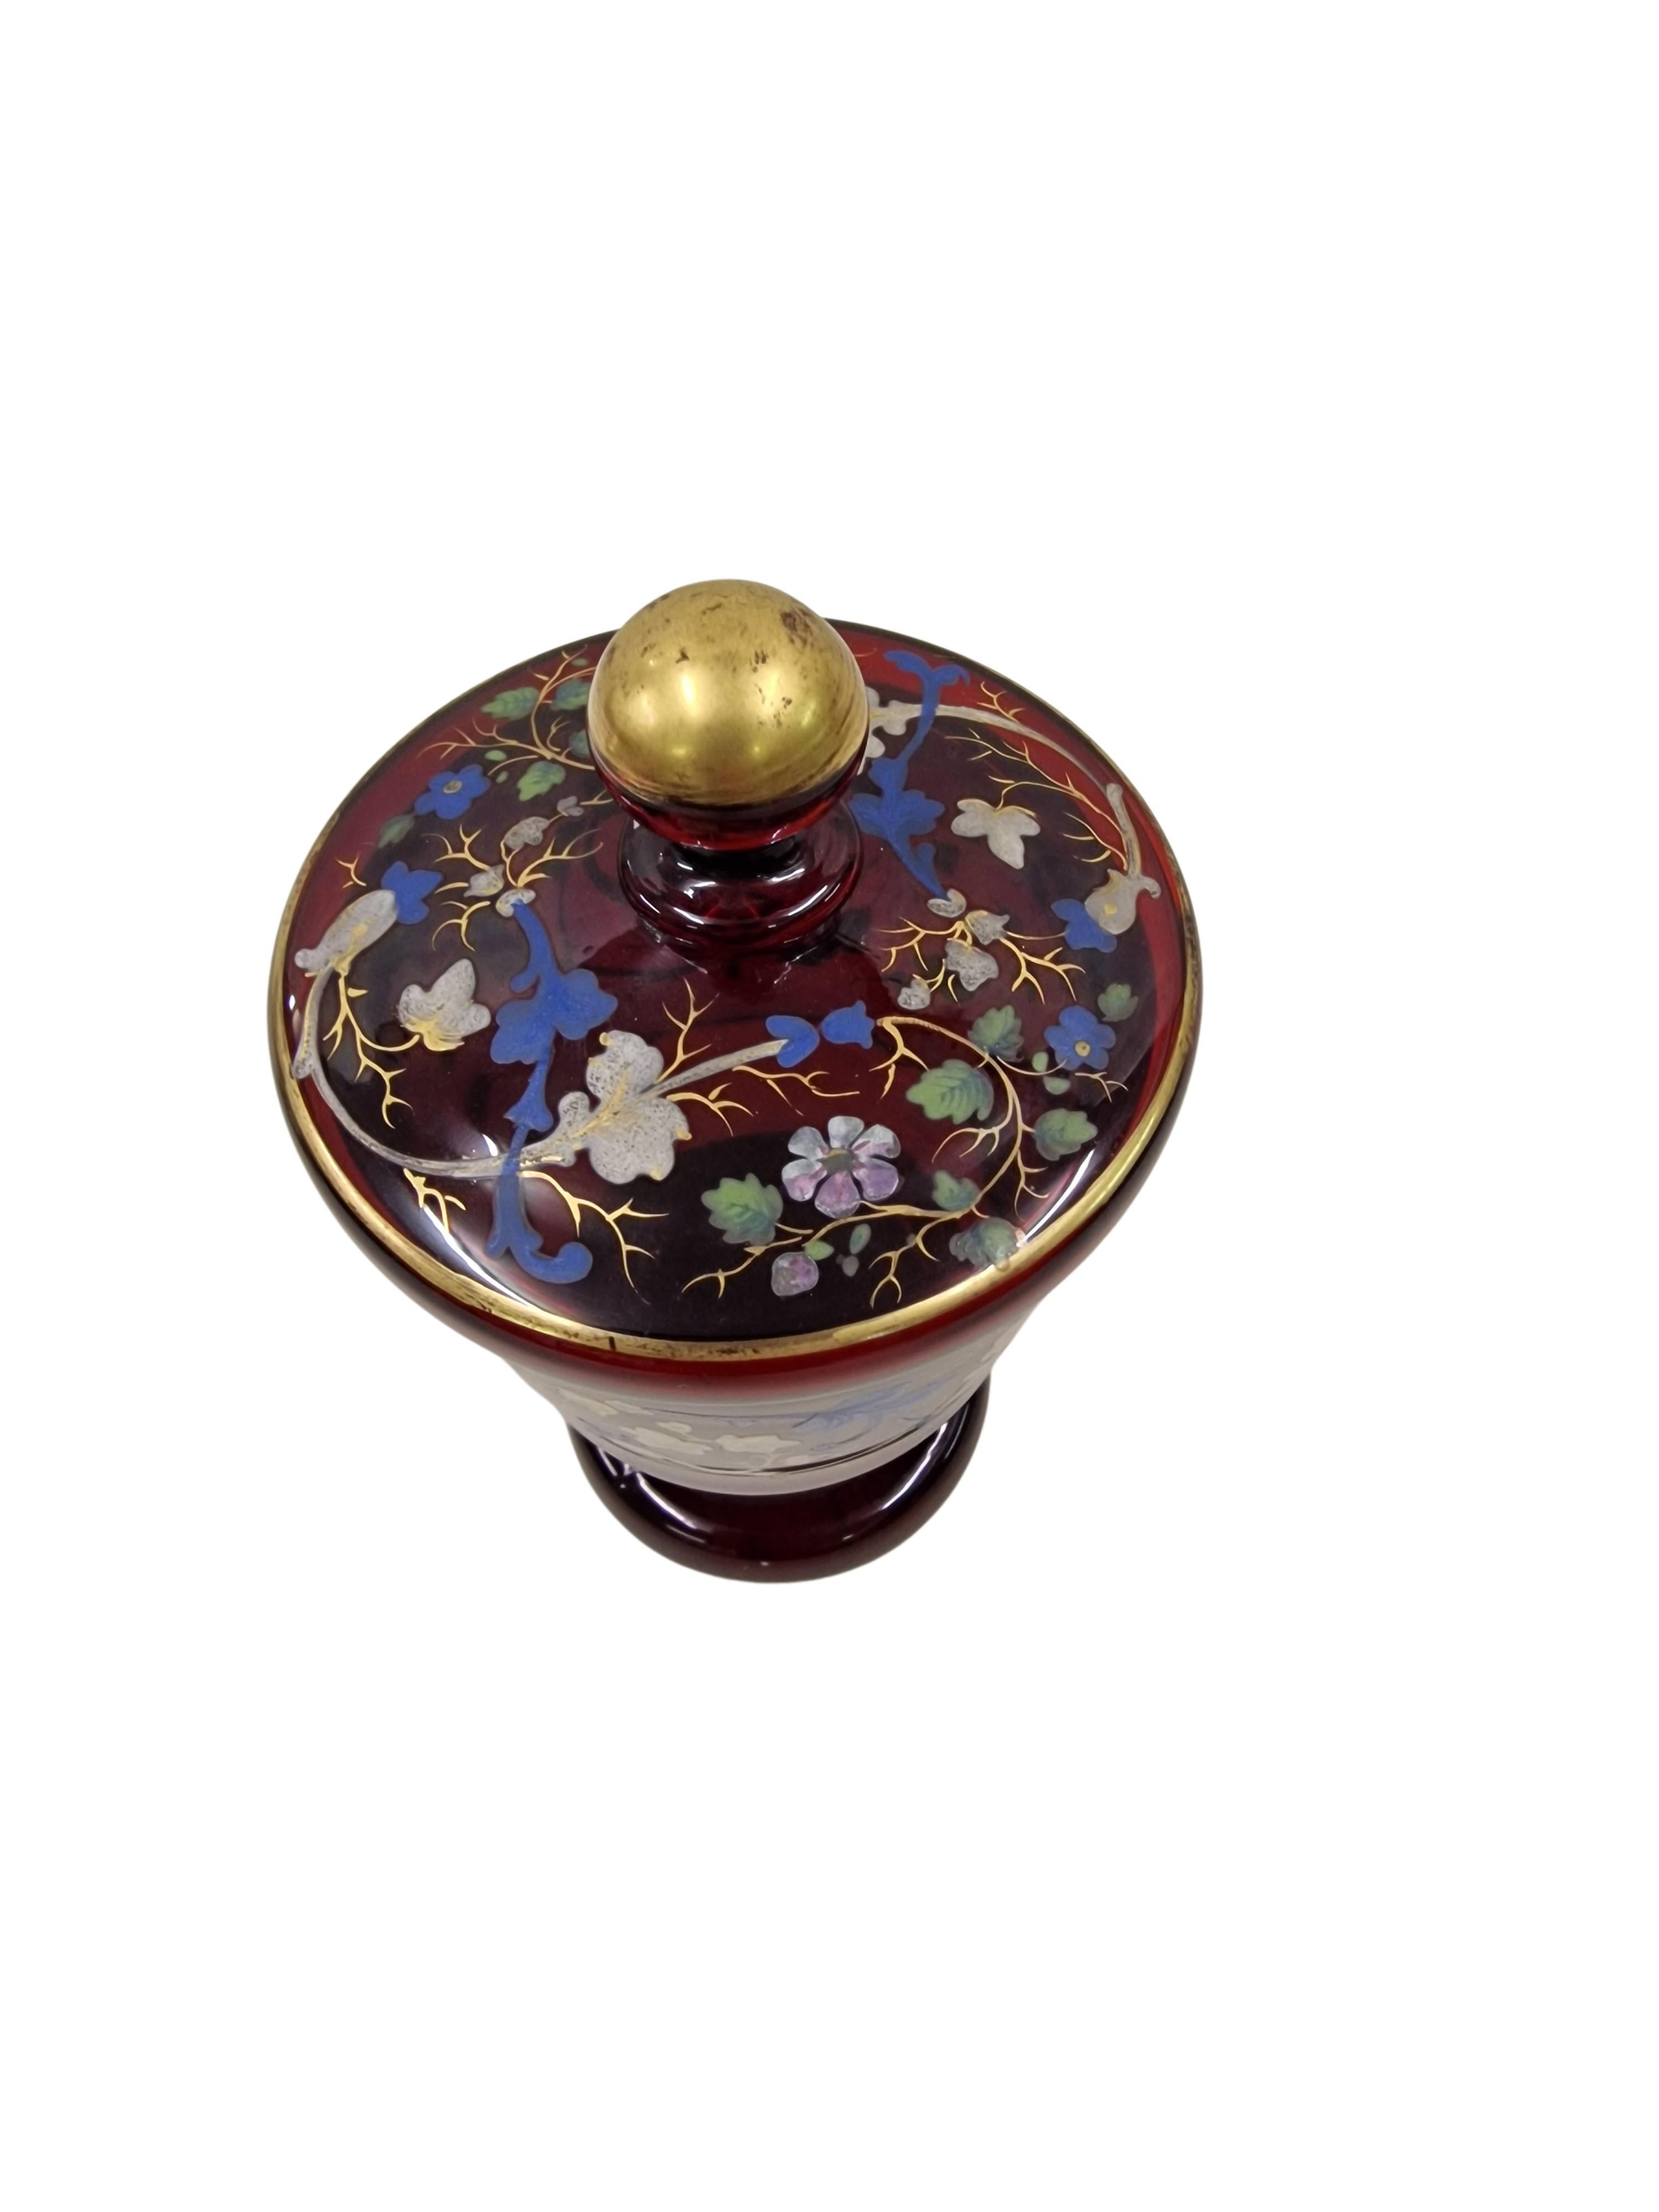 Wonderful goblet with lid, made circa 1850 in the late Biedermeier period in the Middle of Europe, in Austria. This wonderful object is out of ruby red glass which has a beautiful couloring in the light. The goblet is covered in hand-painted enamel